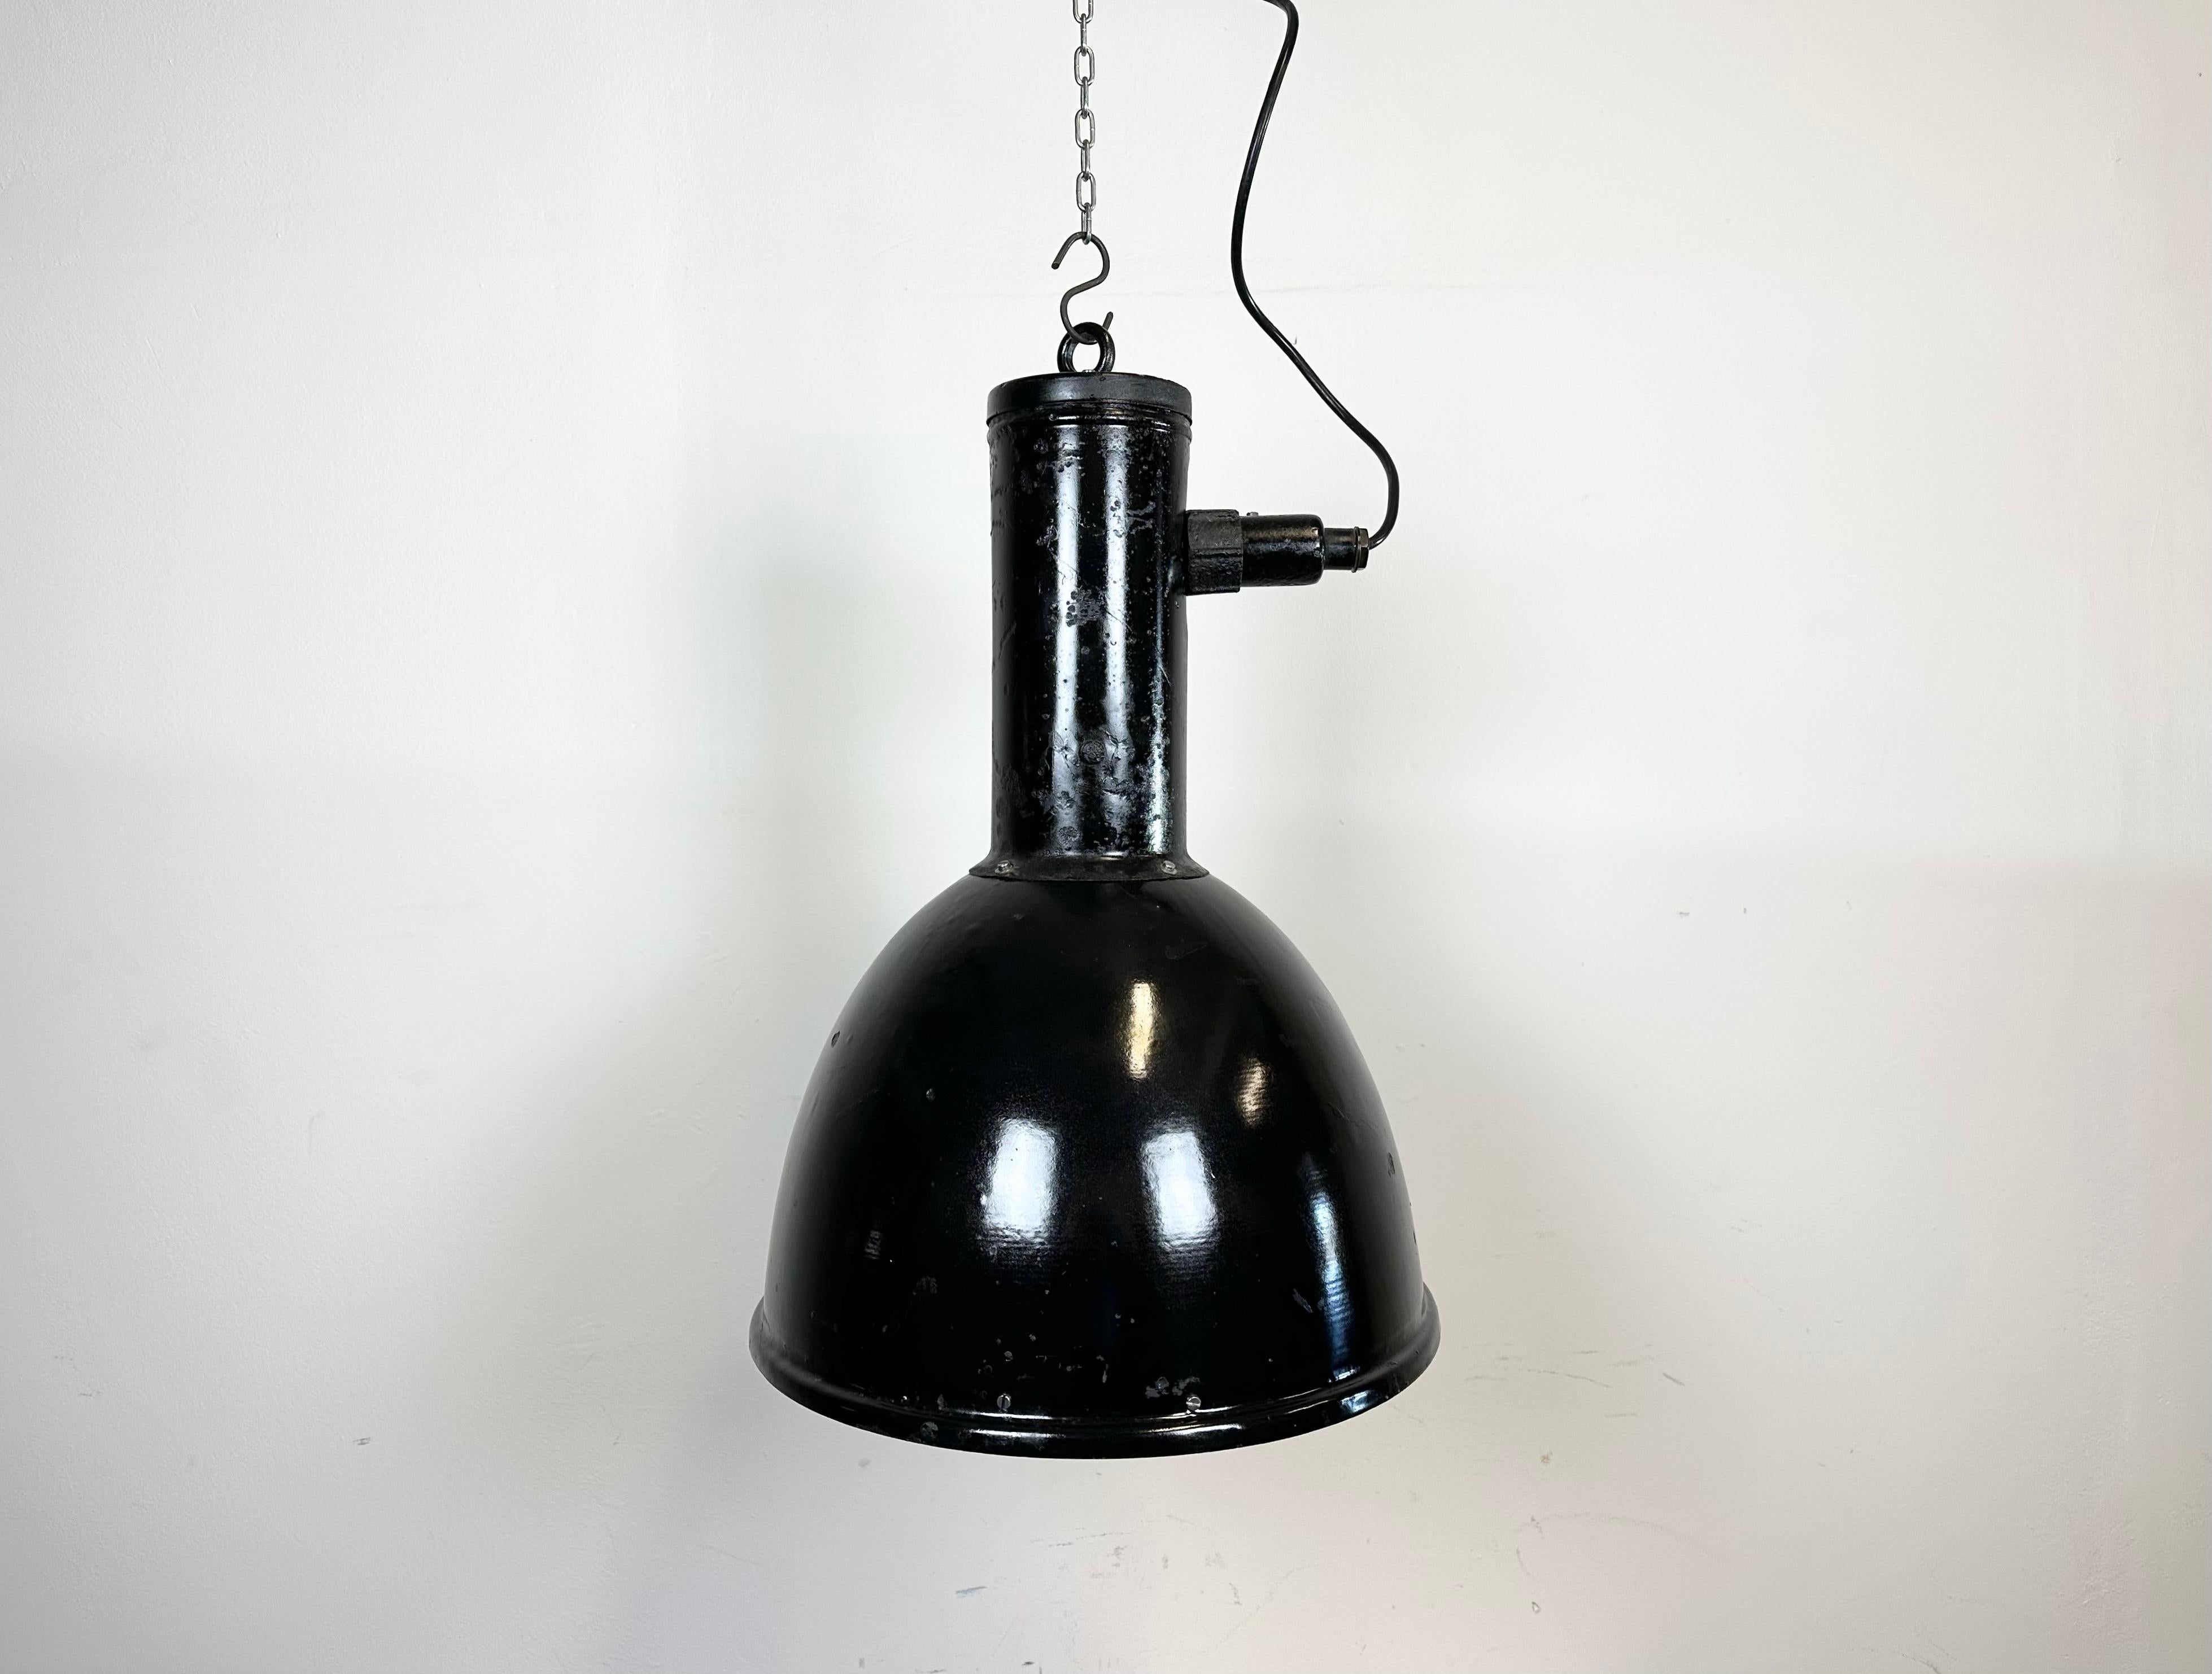 Industrial factory pendant light made in former Czechoslovakia during the 1950s. It features black enamel shade with white enamel interior and black lacquered iron neck with hook. The porcelain socket requires stndard E 27/ E26 light bulbs. New